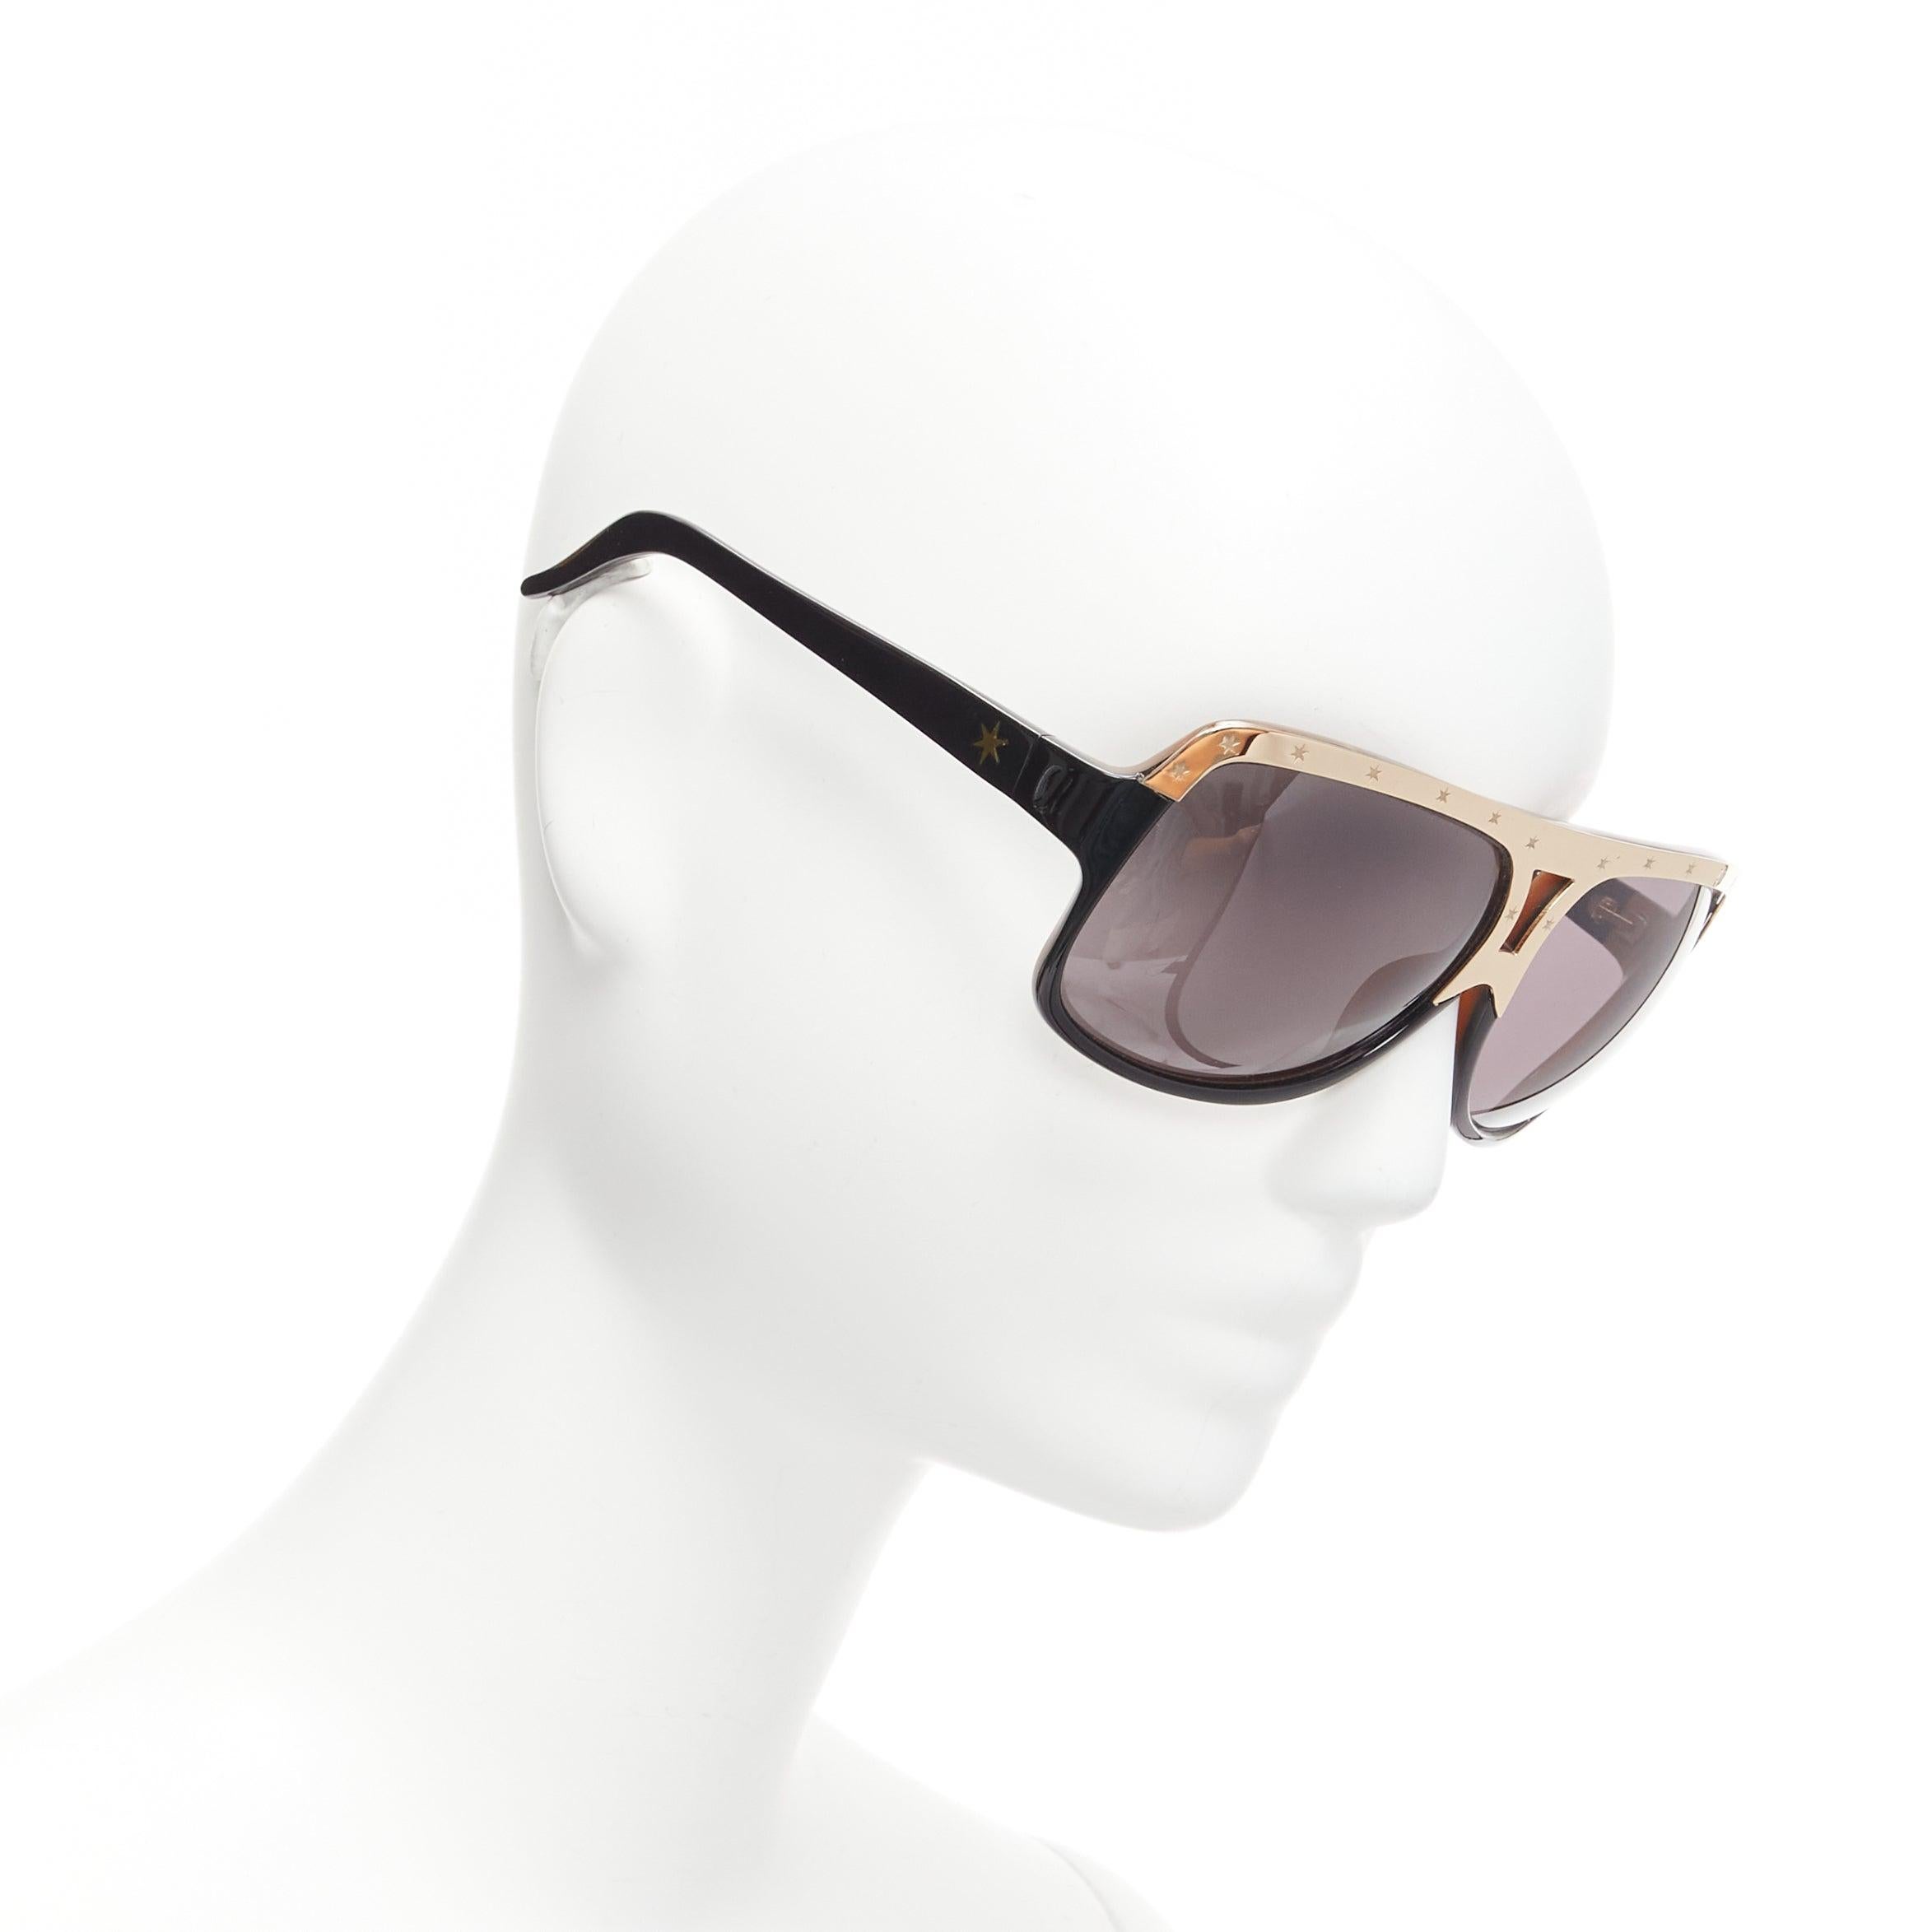 VICTORIA BECKHAM Vintage gold star top bar black oversized squared sunglasses
Reference: NKLL/A00087
Brand: Victoria Beckham
Material: Plastic, Metal
Color: Black, Gold
Pattern: Star

CONDITION:
Condition: Very good, this item was pre-owned and is